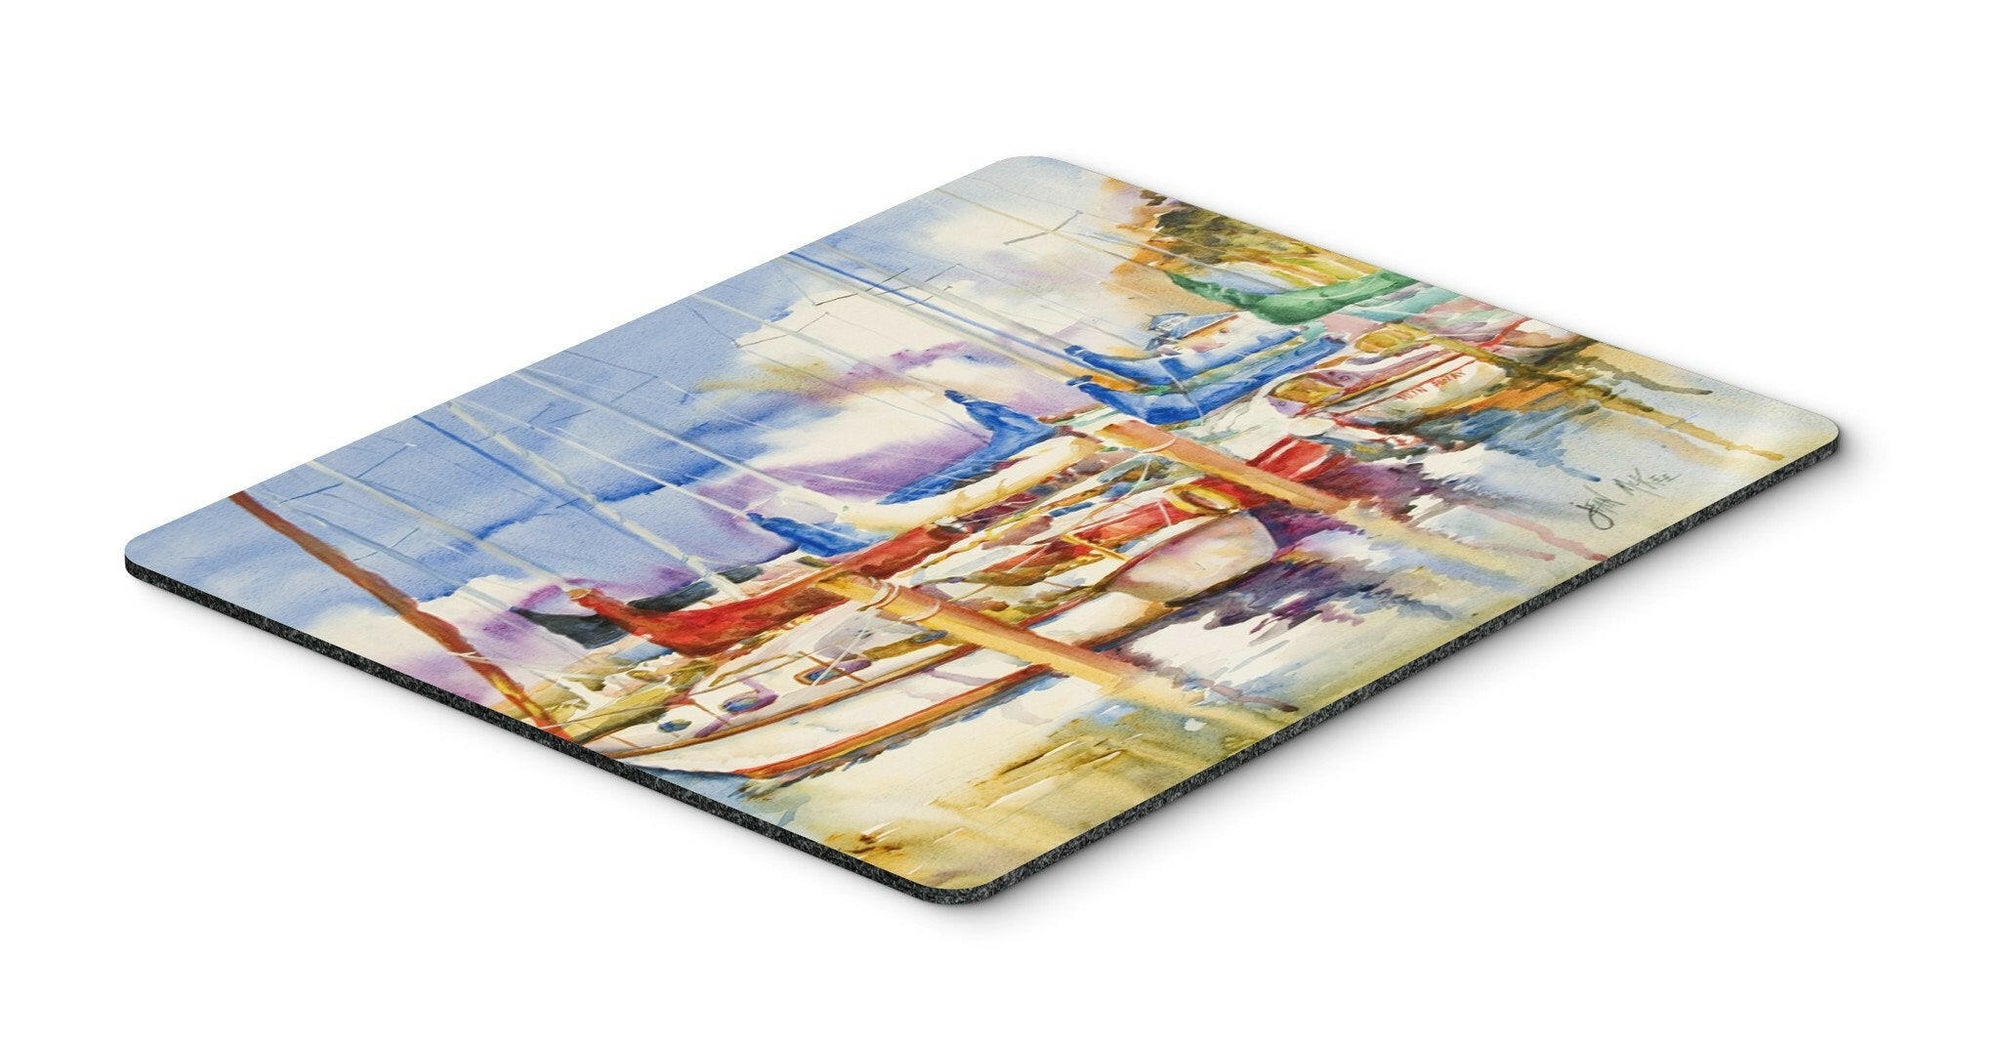 End Stall Sailboats Mouse Pad, Hot Pad or Trivet JMK1049MP by Caroline's Treasures